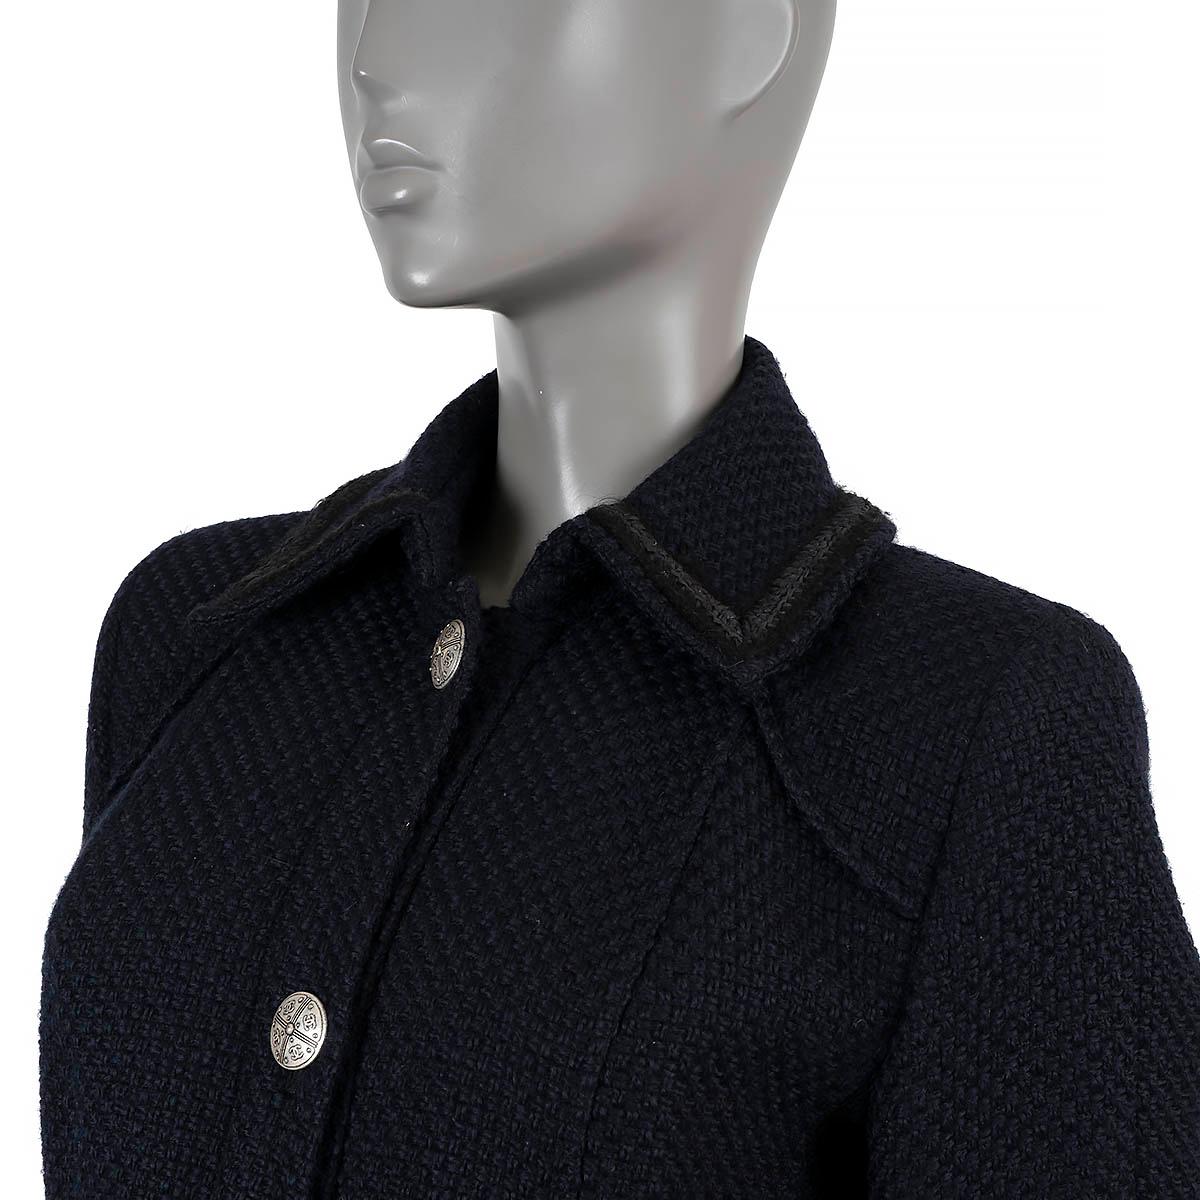 CHANEL navy blue wool 2009 09A TWEED PEACOAT Coat Jacket 40 M For Sale 2